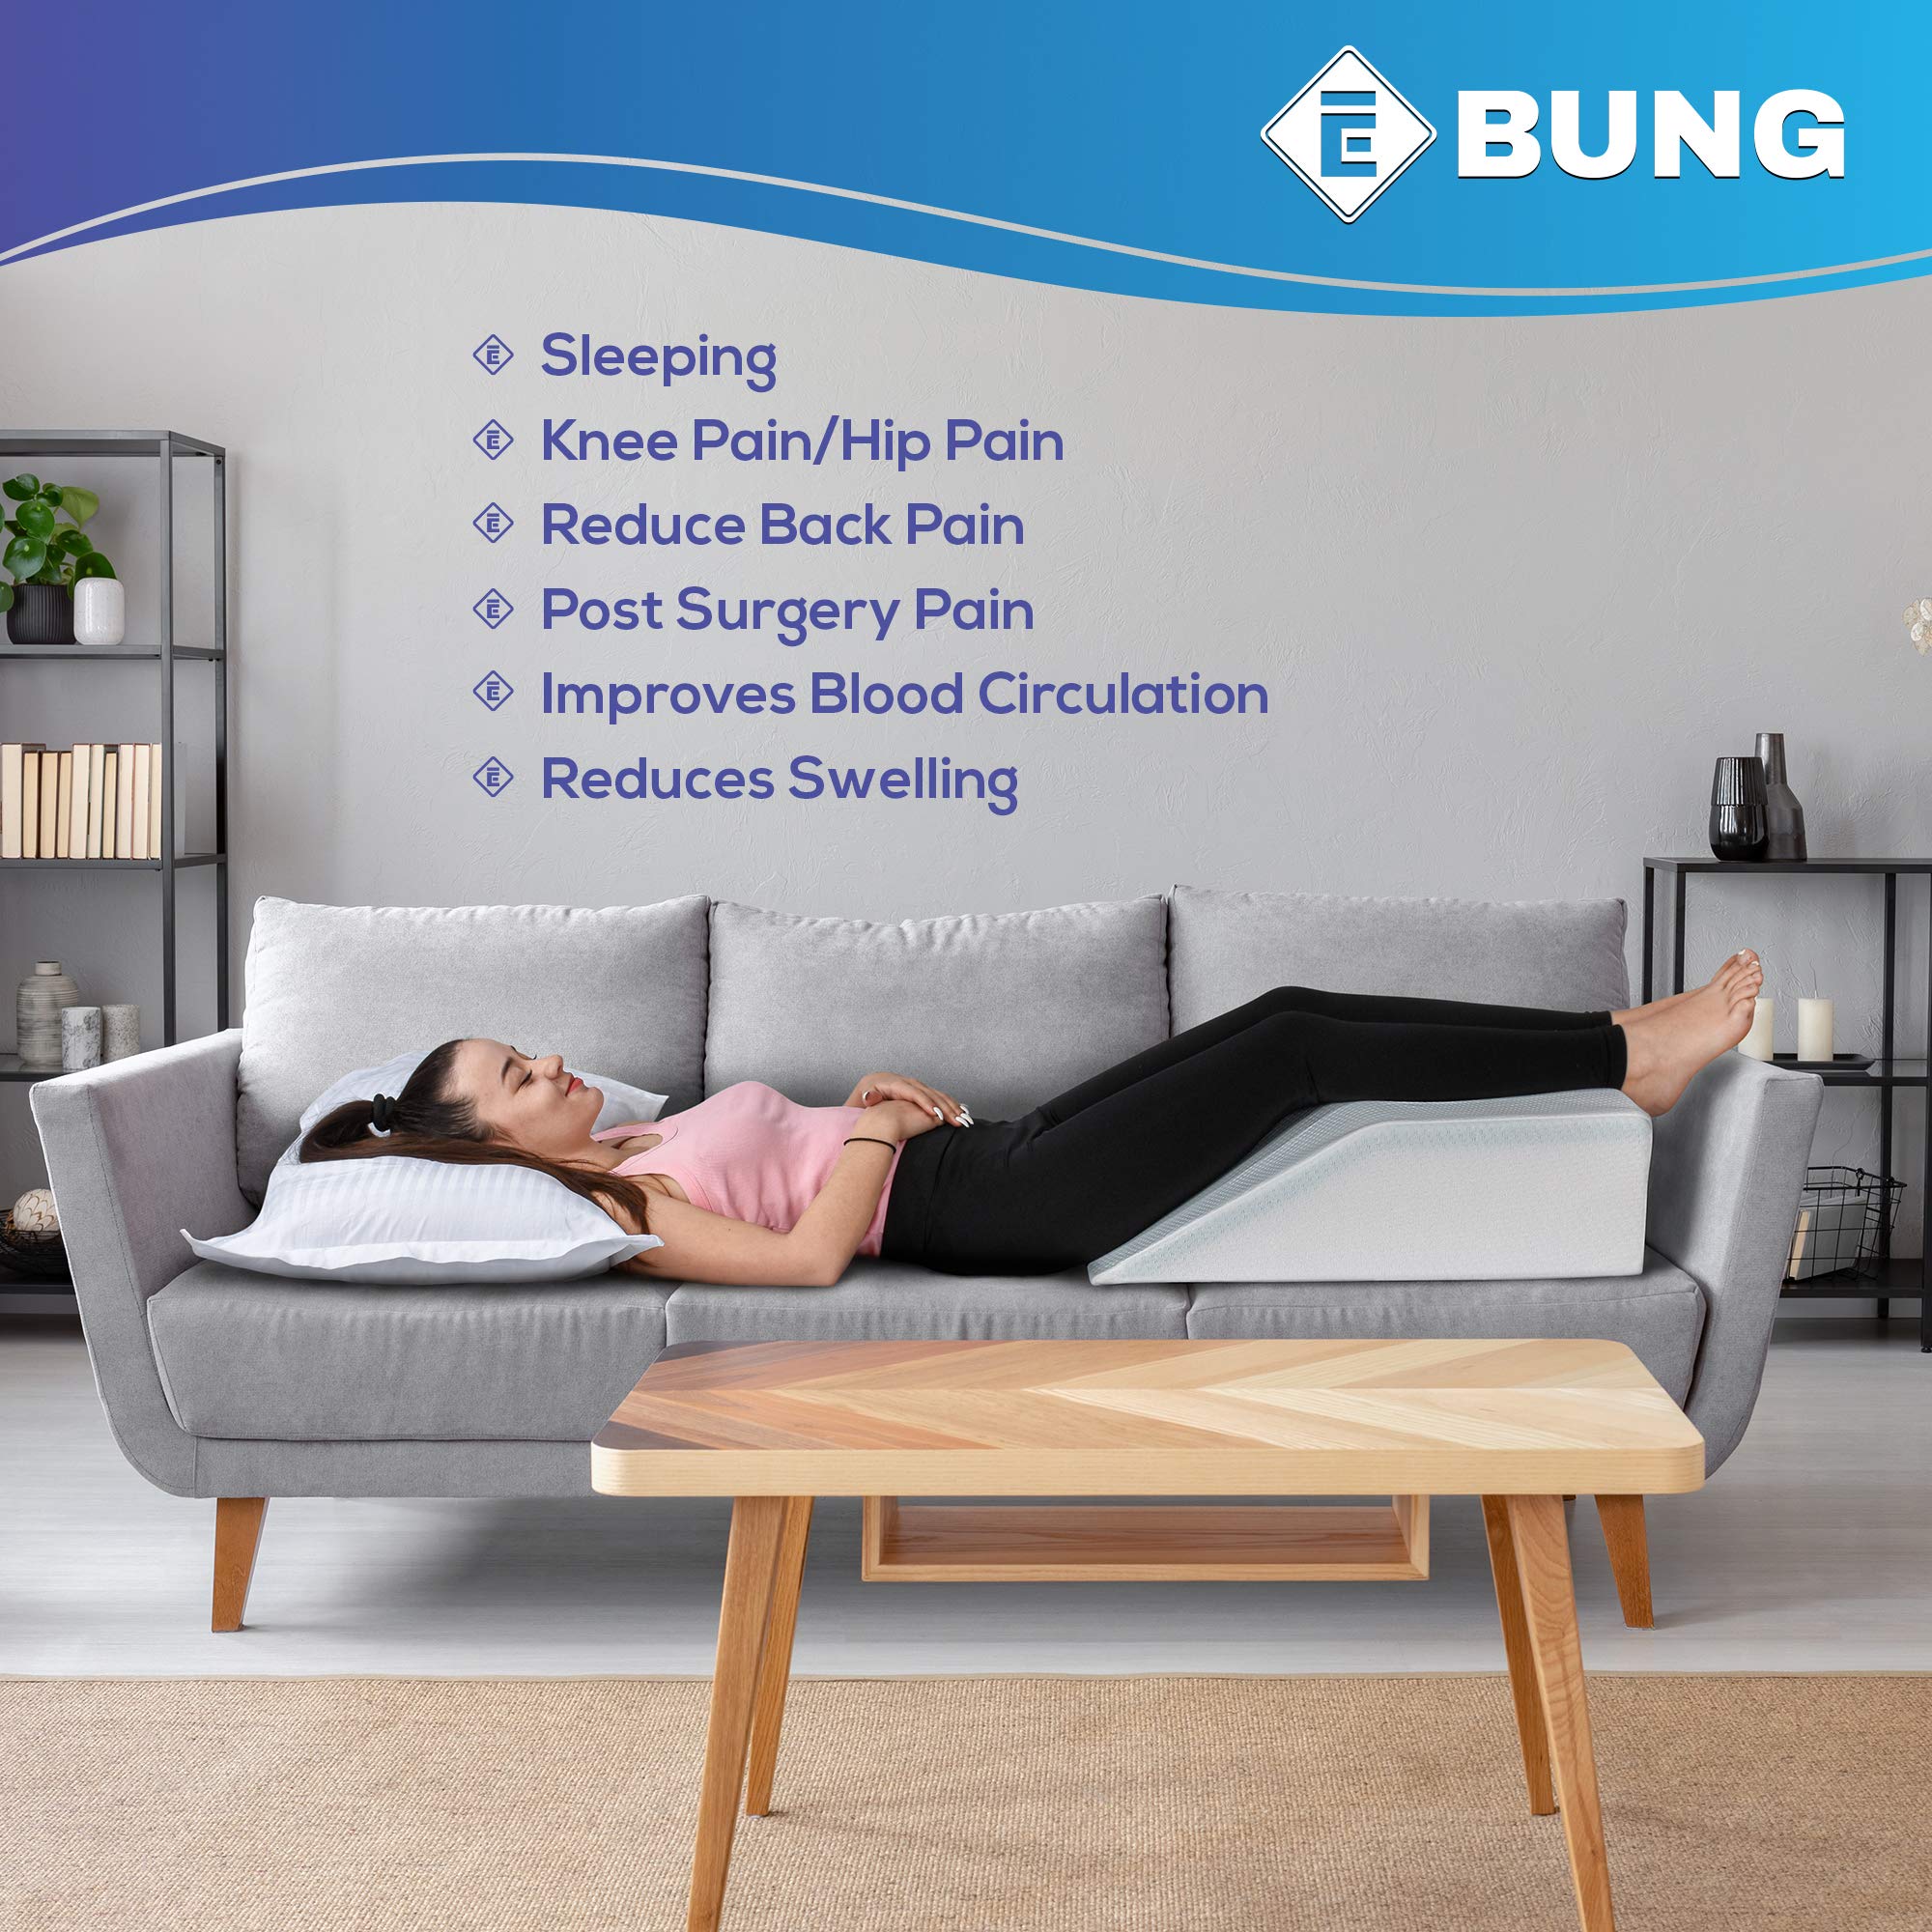 Ebung Leg Elevation Memory Foam Pillow with Removeable, Washable Cover  - Acceptable